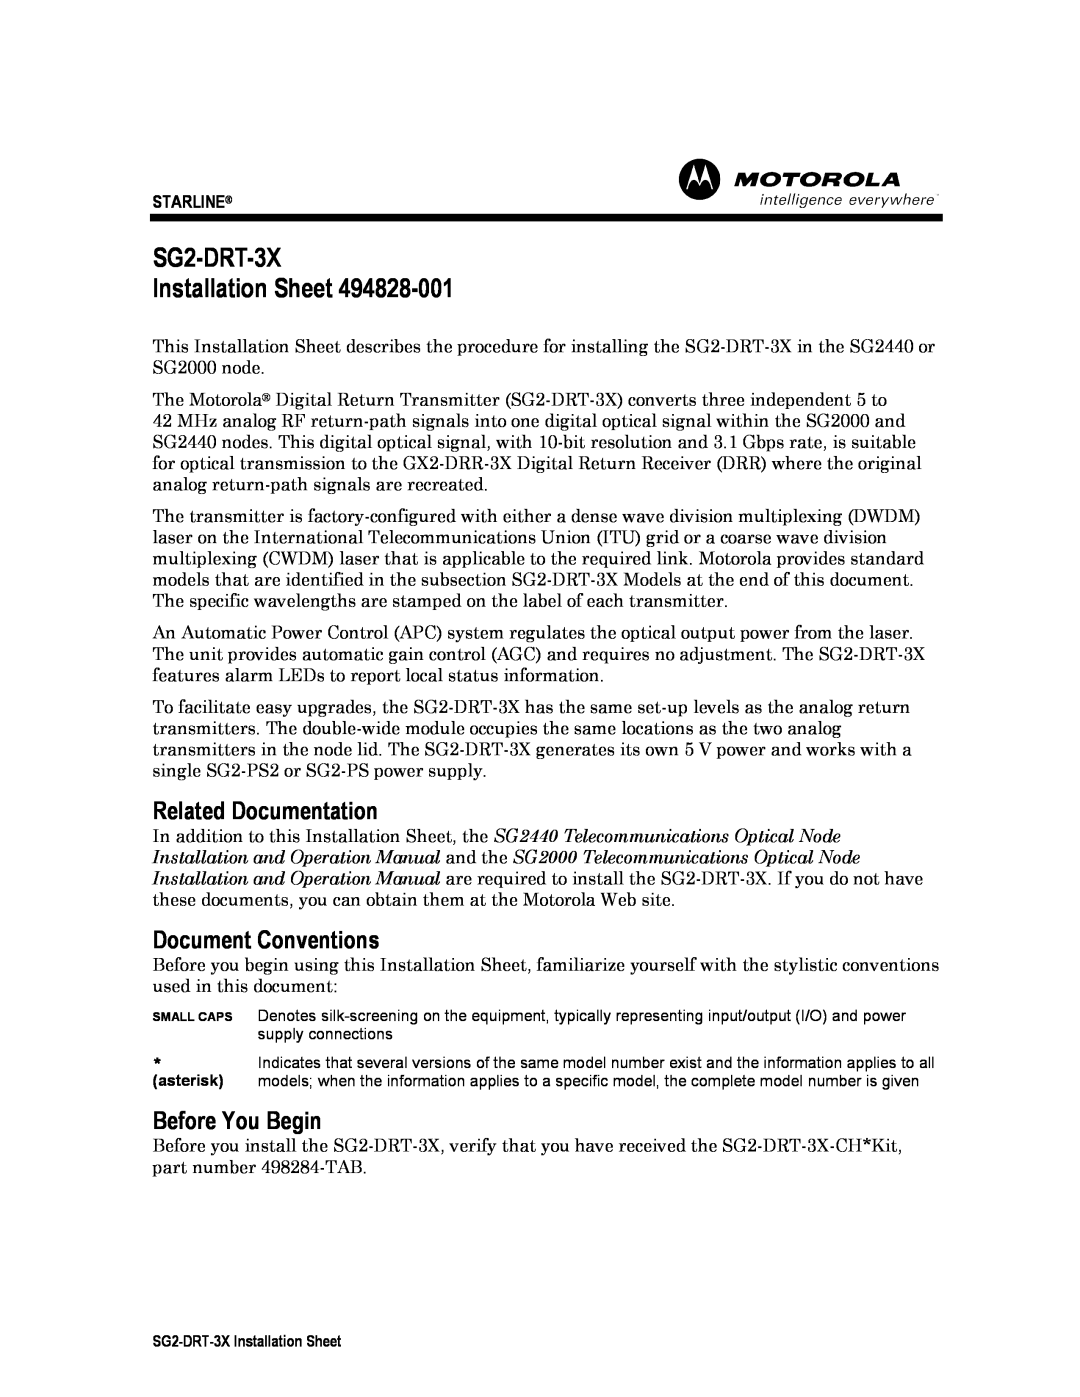 Cuisinart SG2-DRT-3X operation manual Related Documentation, Document Conventions, Before You Begin, Starline 